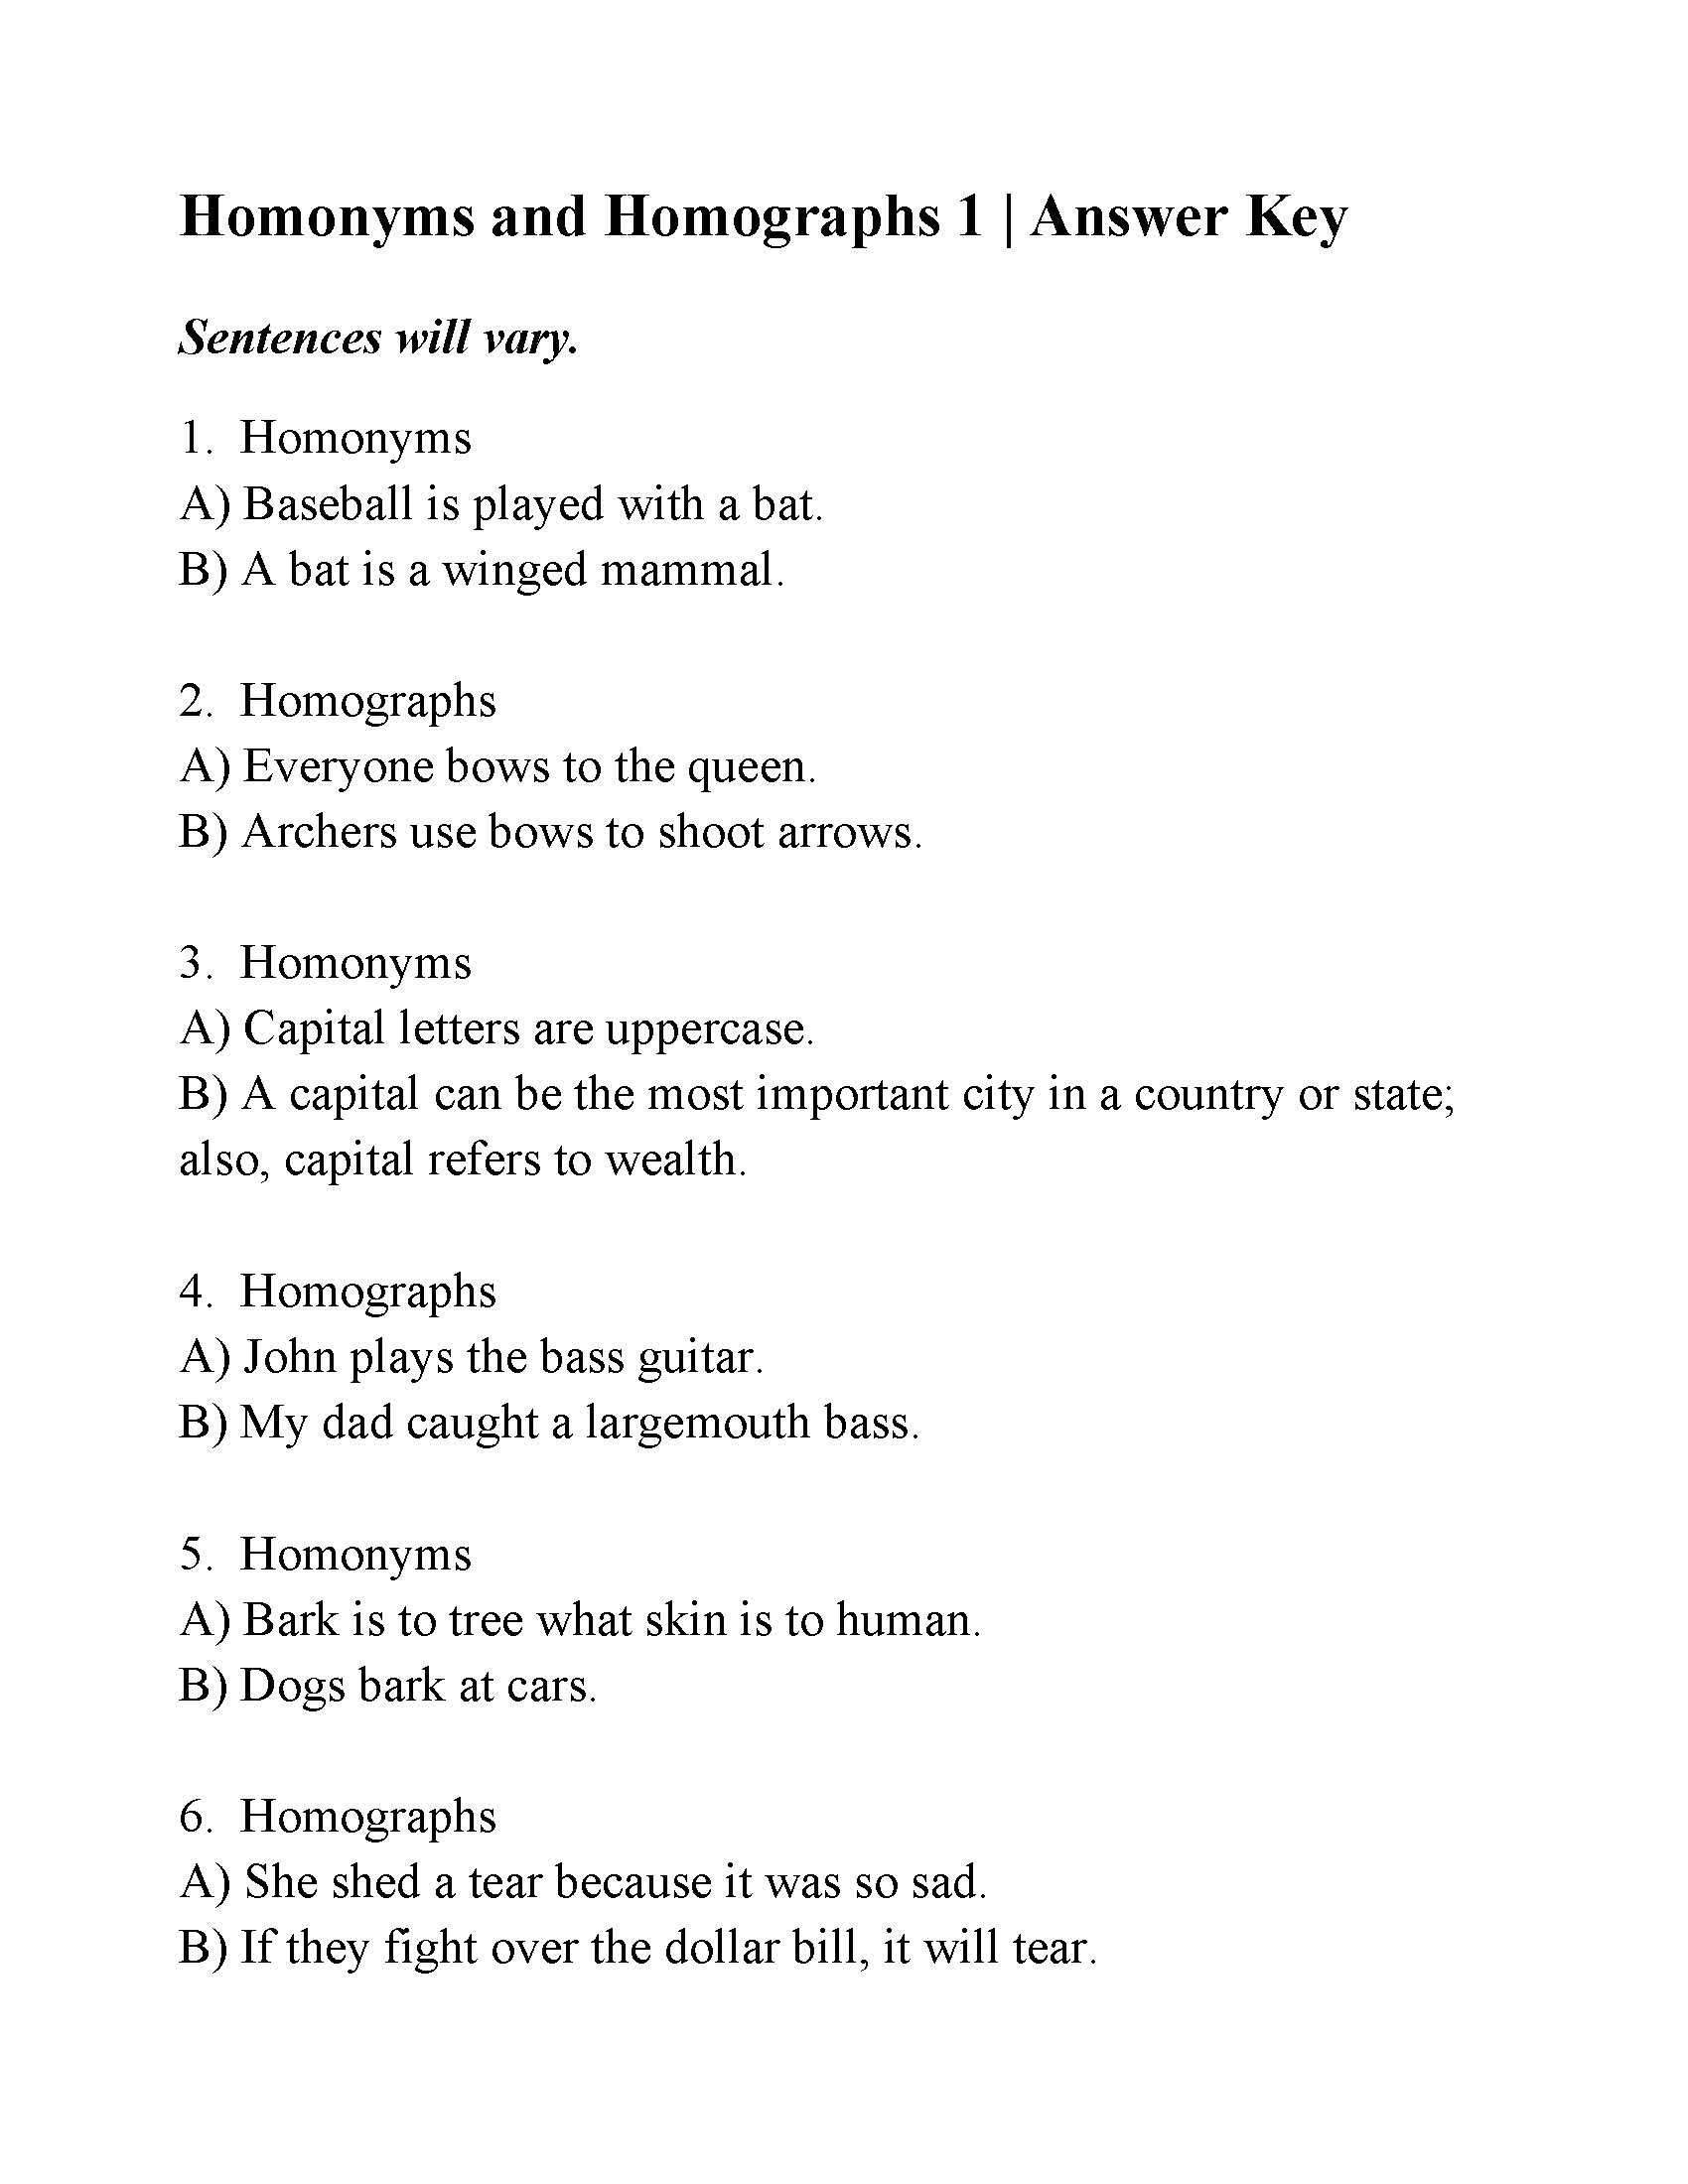 This is a preview image of Homonyms and Homographs Worksheet 1. Click on it to enlarge it or view the source file.